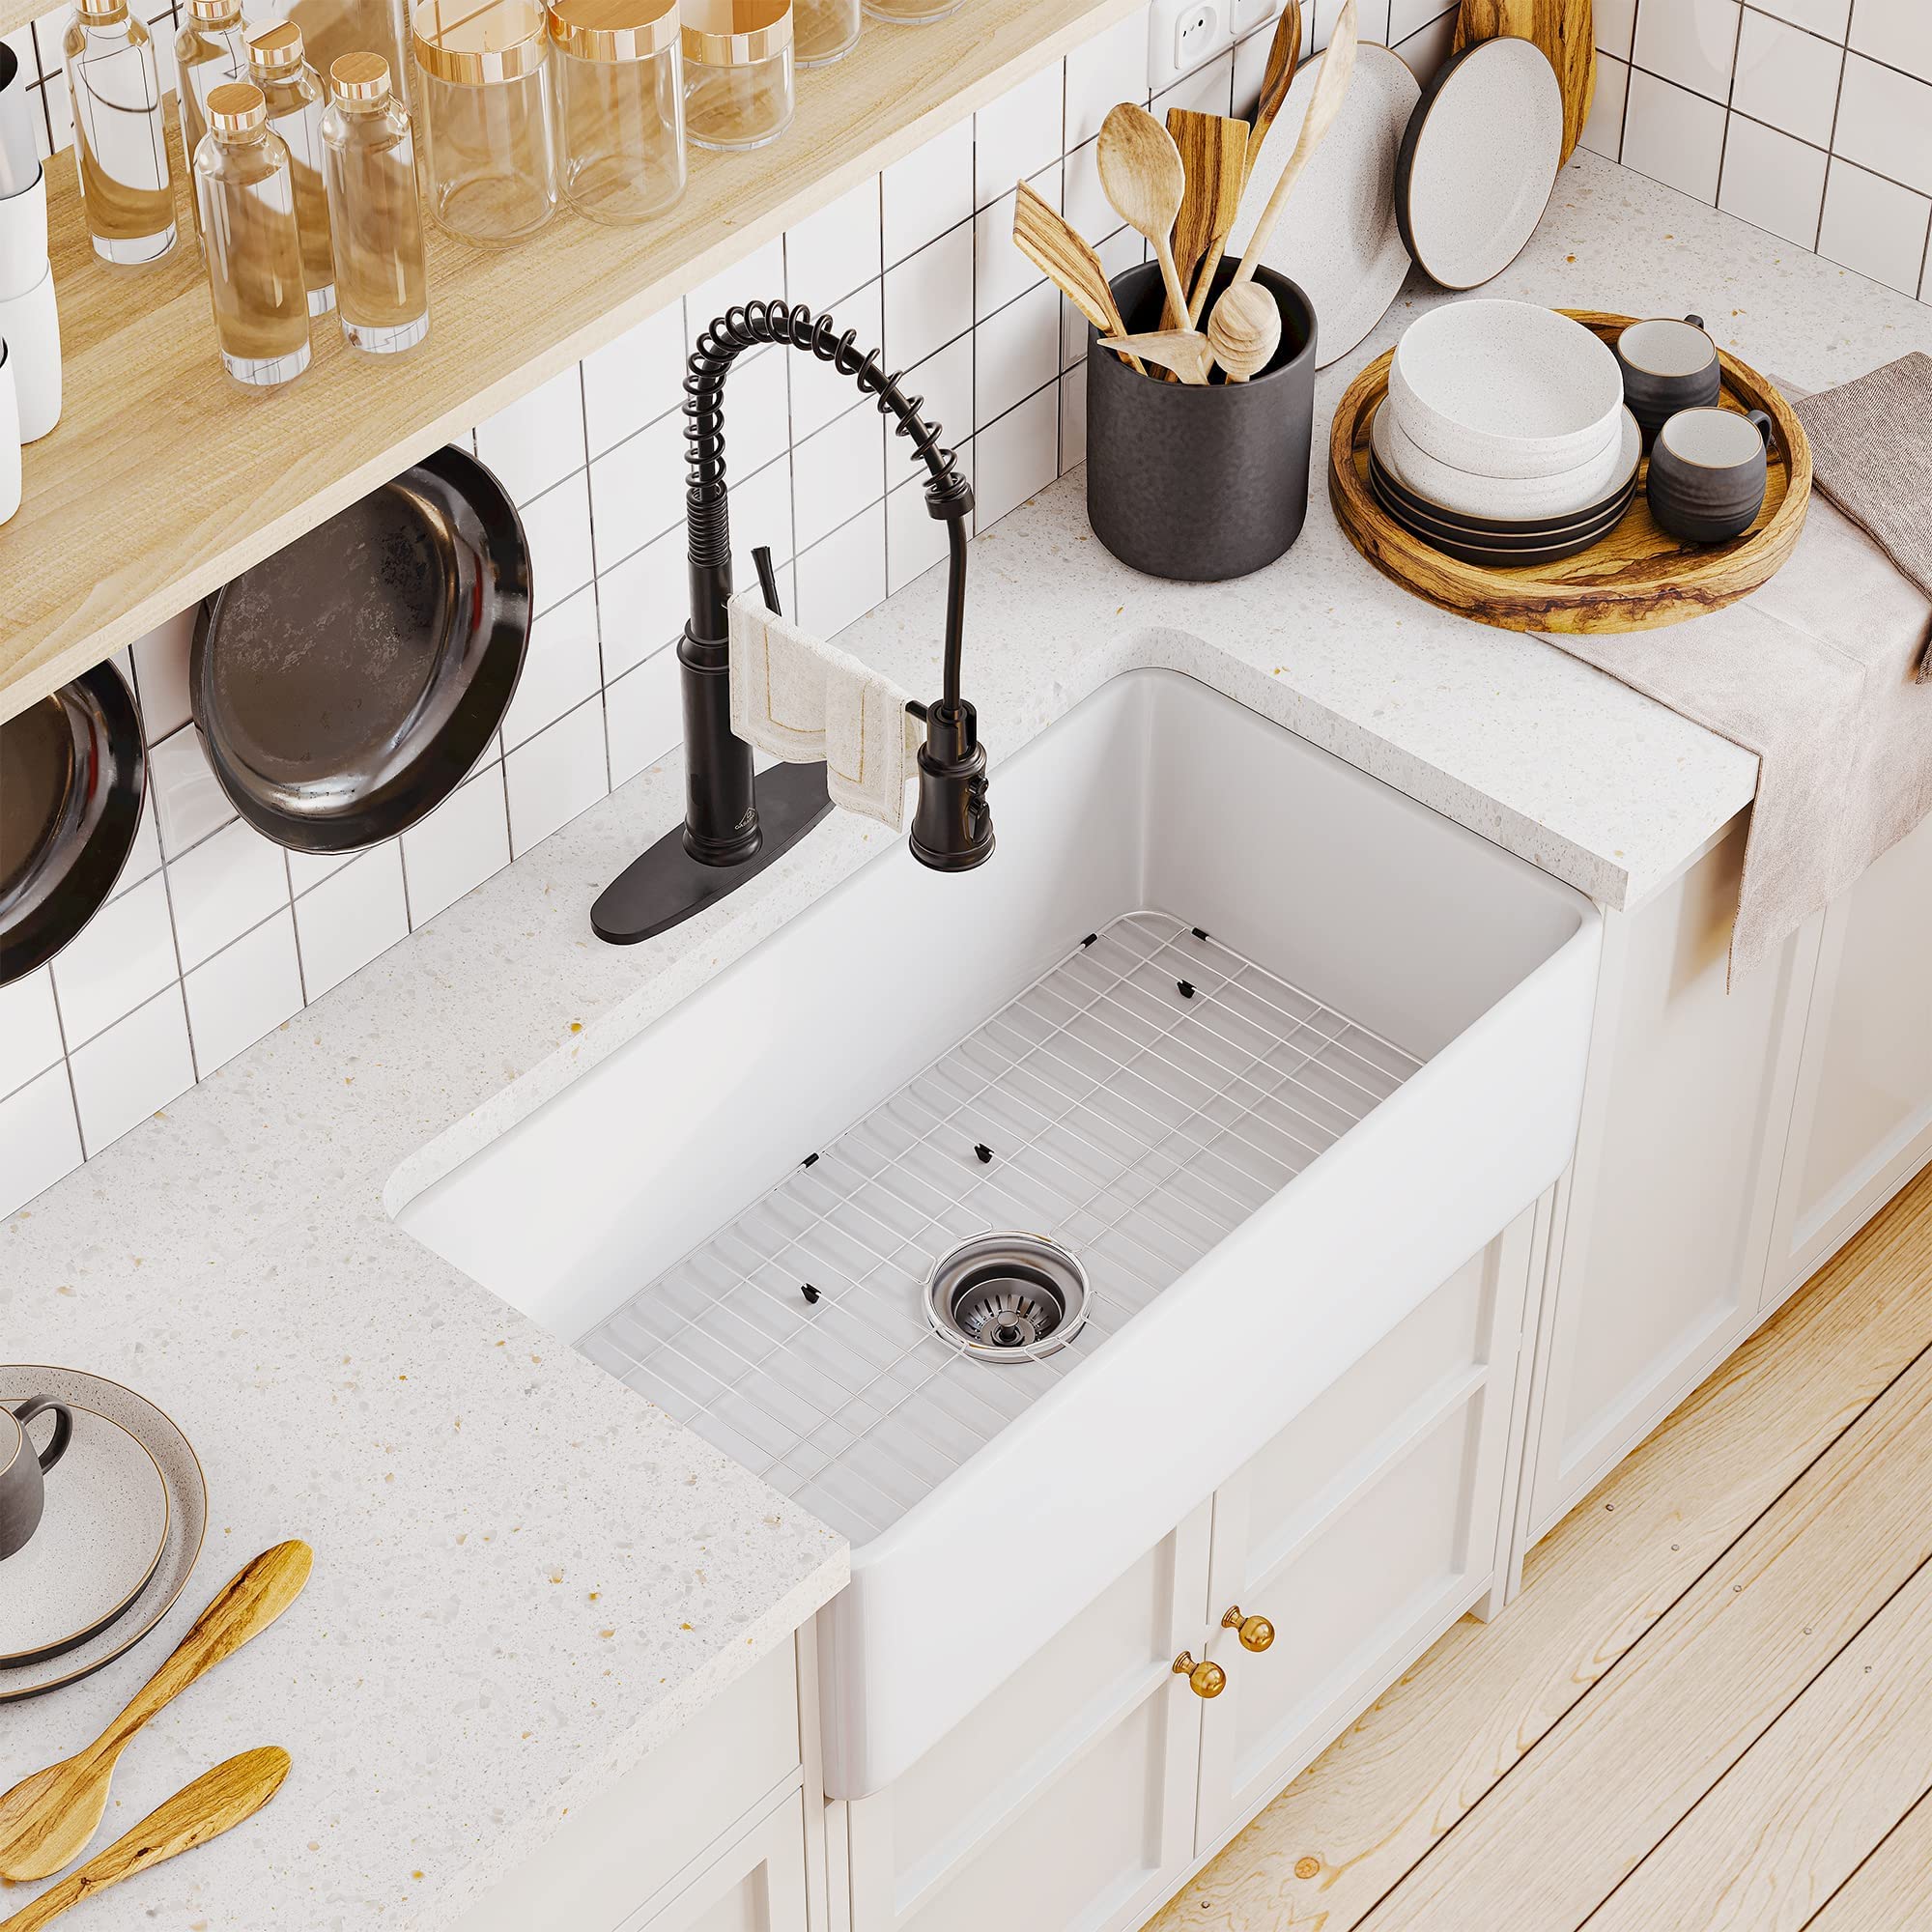 Fireclay 33 in. Single Bowl Farmhouse Apron Kitchen Sink with Bottom Grid and Strainers With cUPC Certified, in Glossy White/Matte Black/Matte Gray